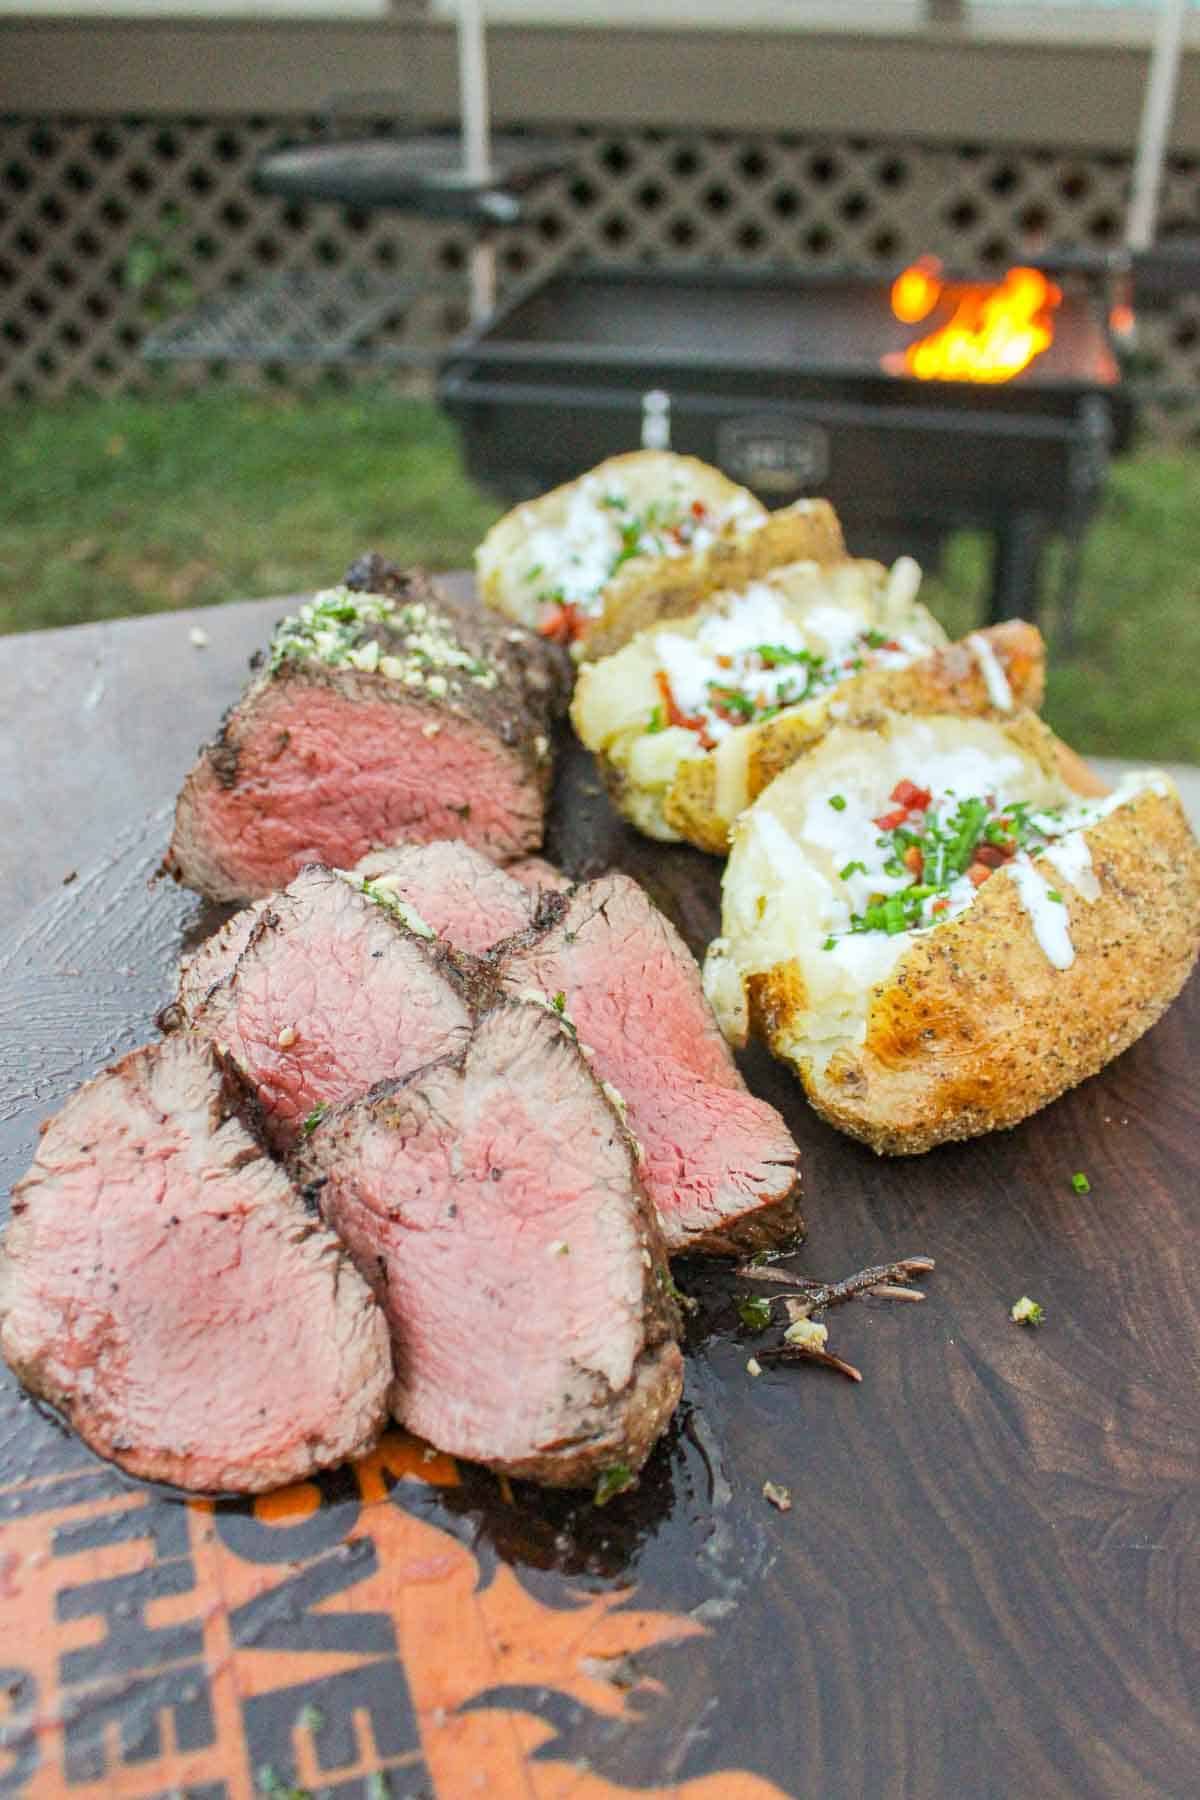 The tenderloin is sliced and presented next to the baked potatoes stuffed with all the best toppings. 